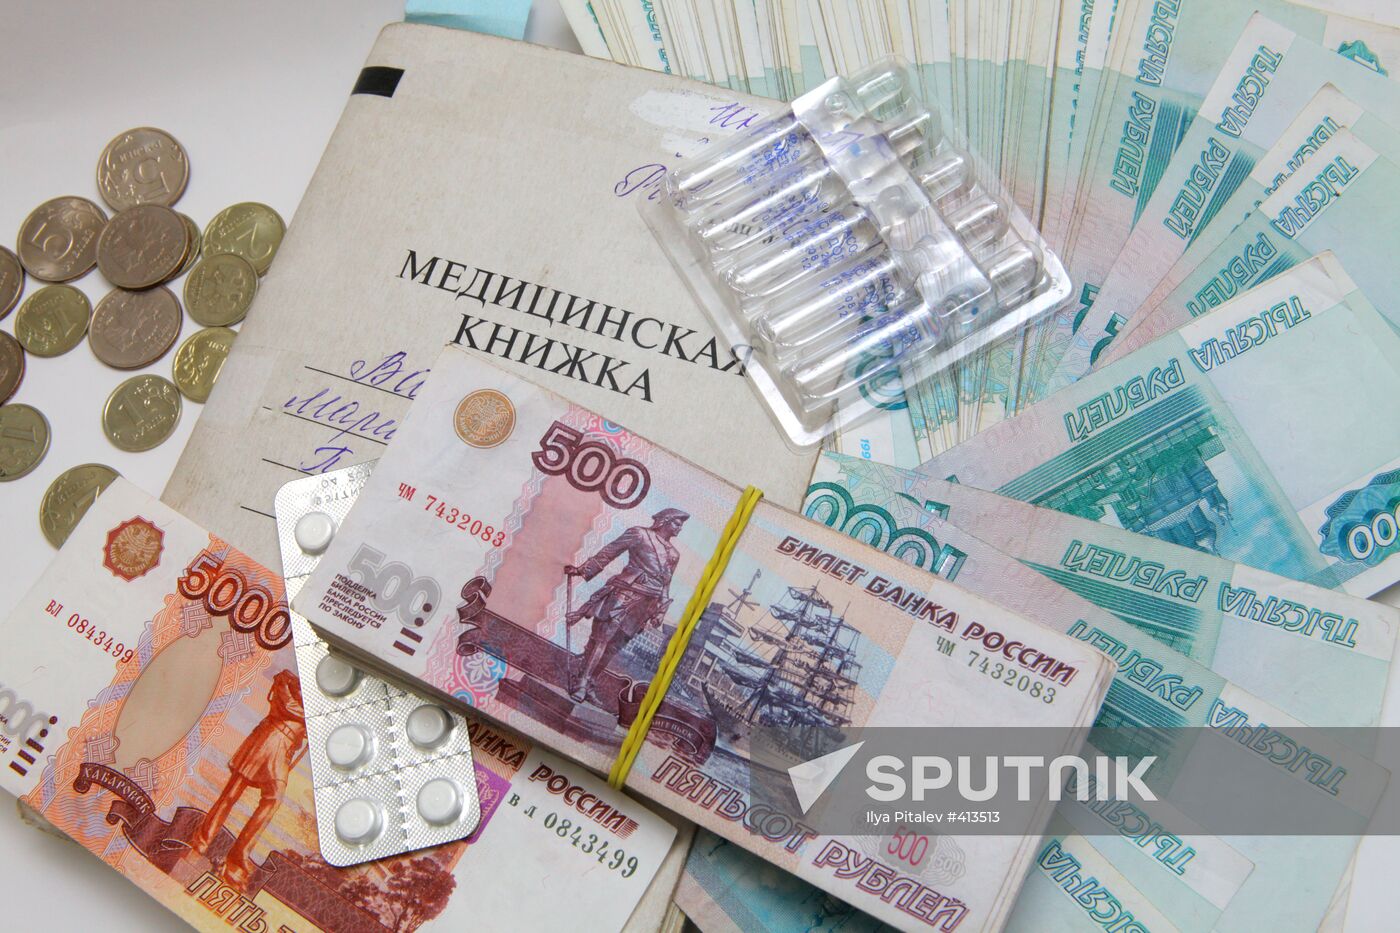 Russian ruble banknotes of different denominations